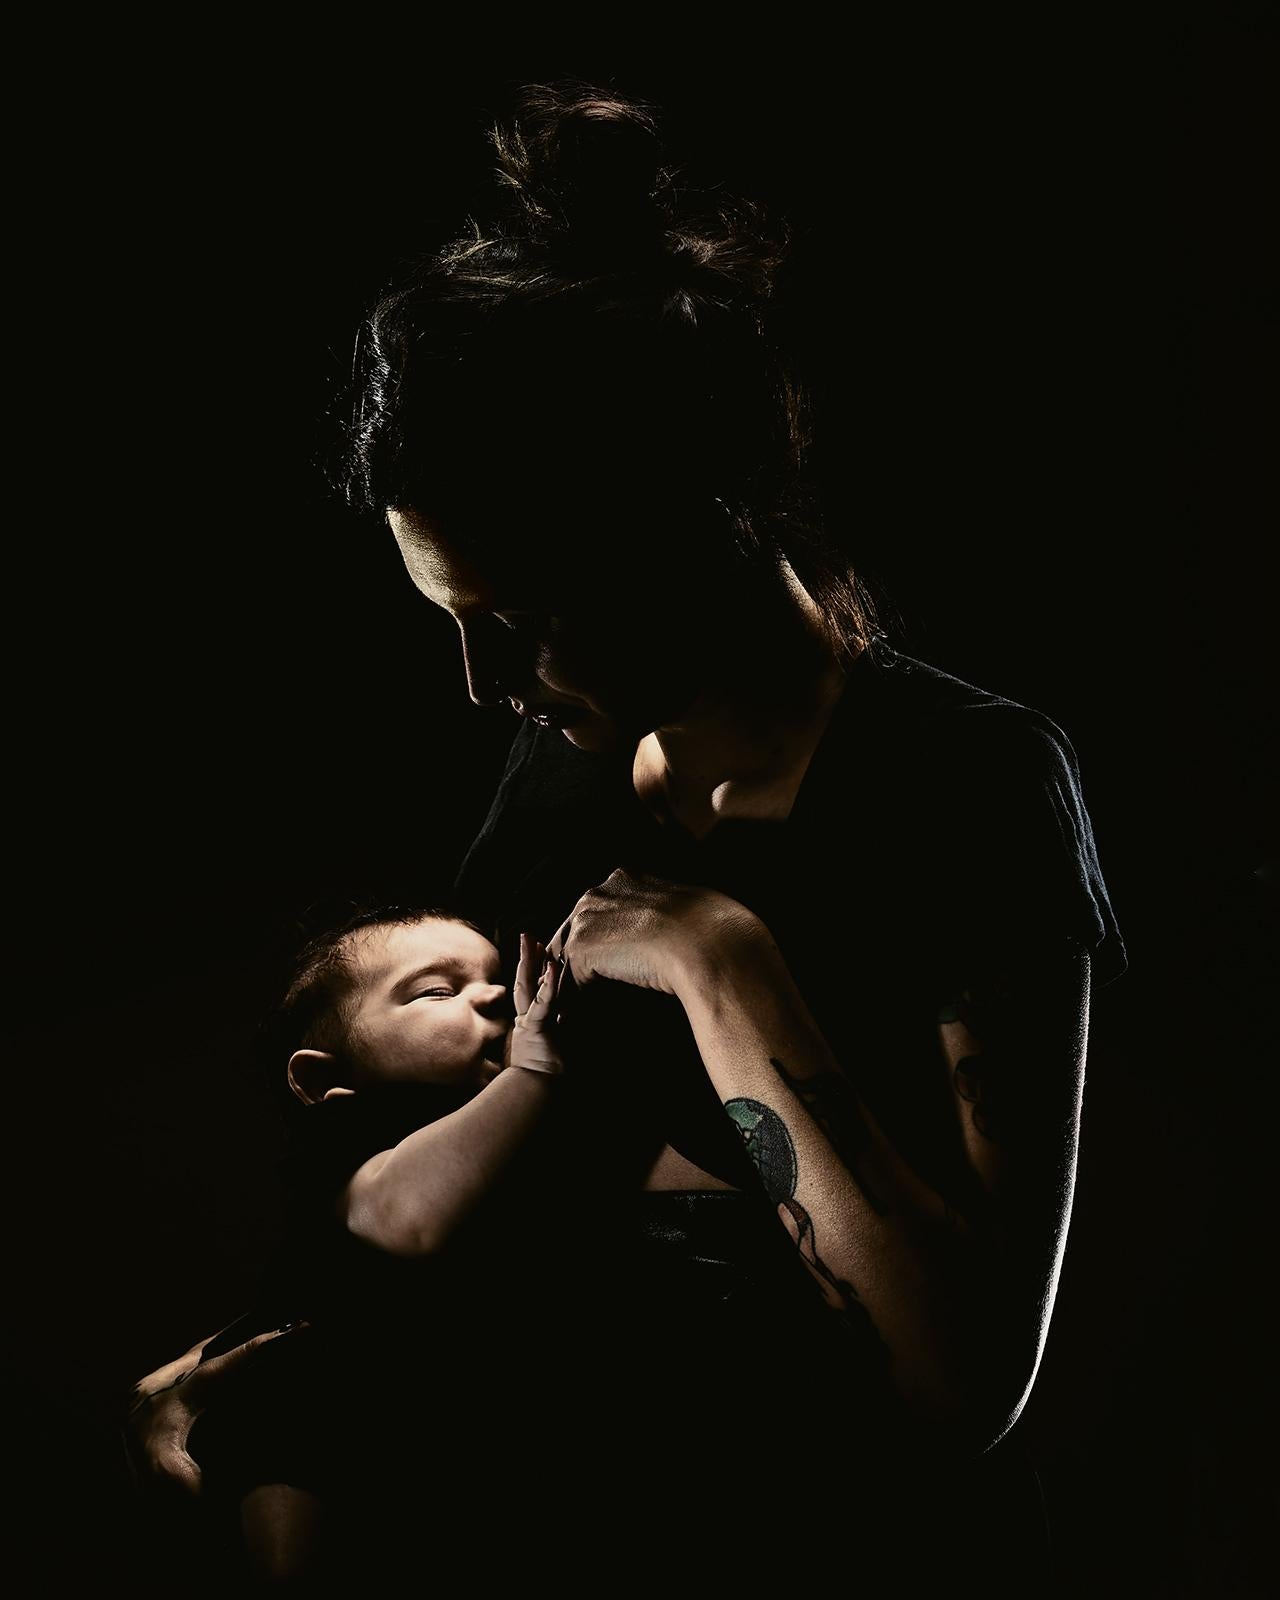 Madonna and Child - Signed limited edition archival pigment print, Edition of 5